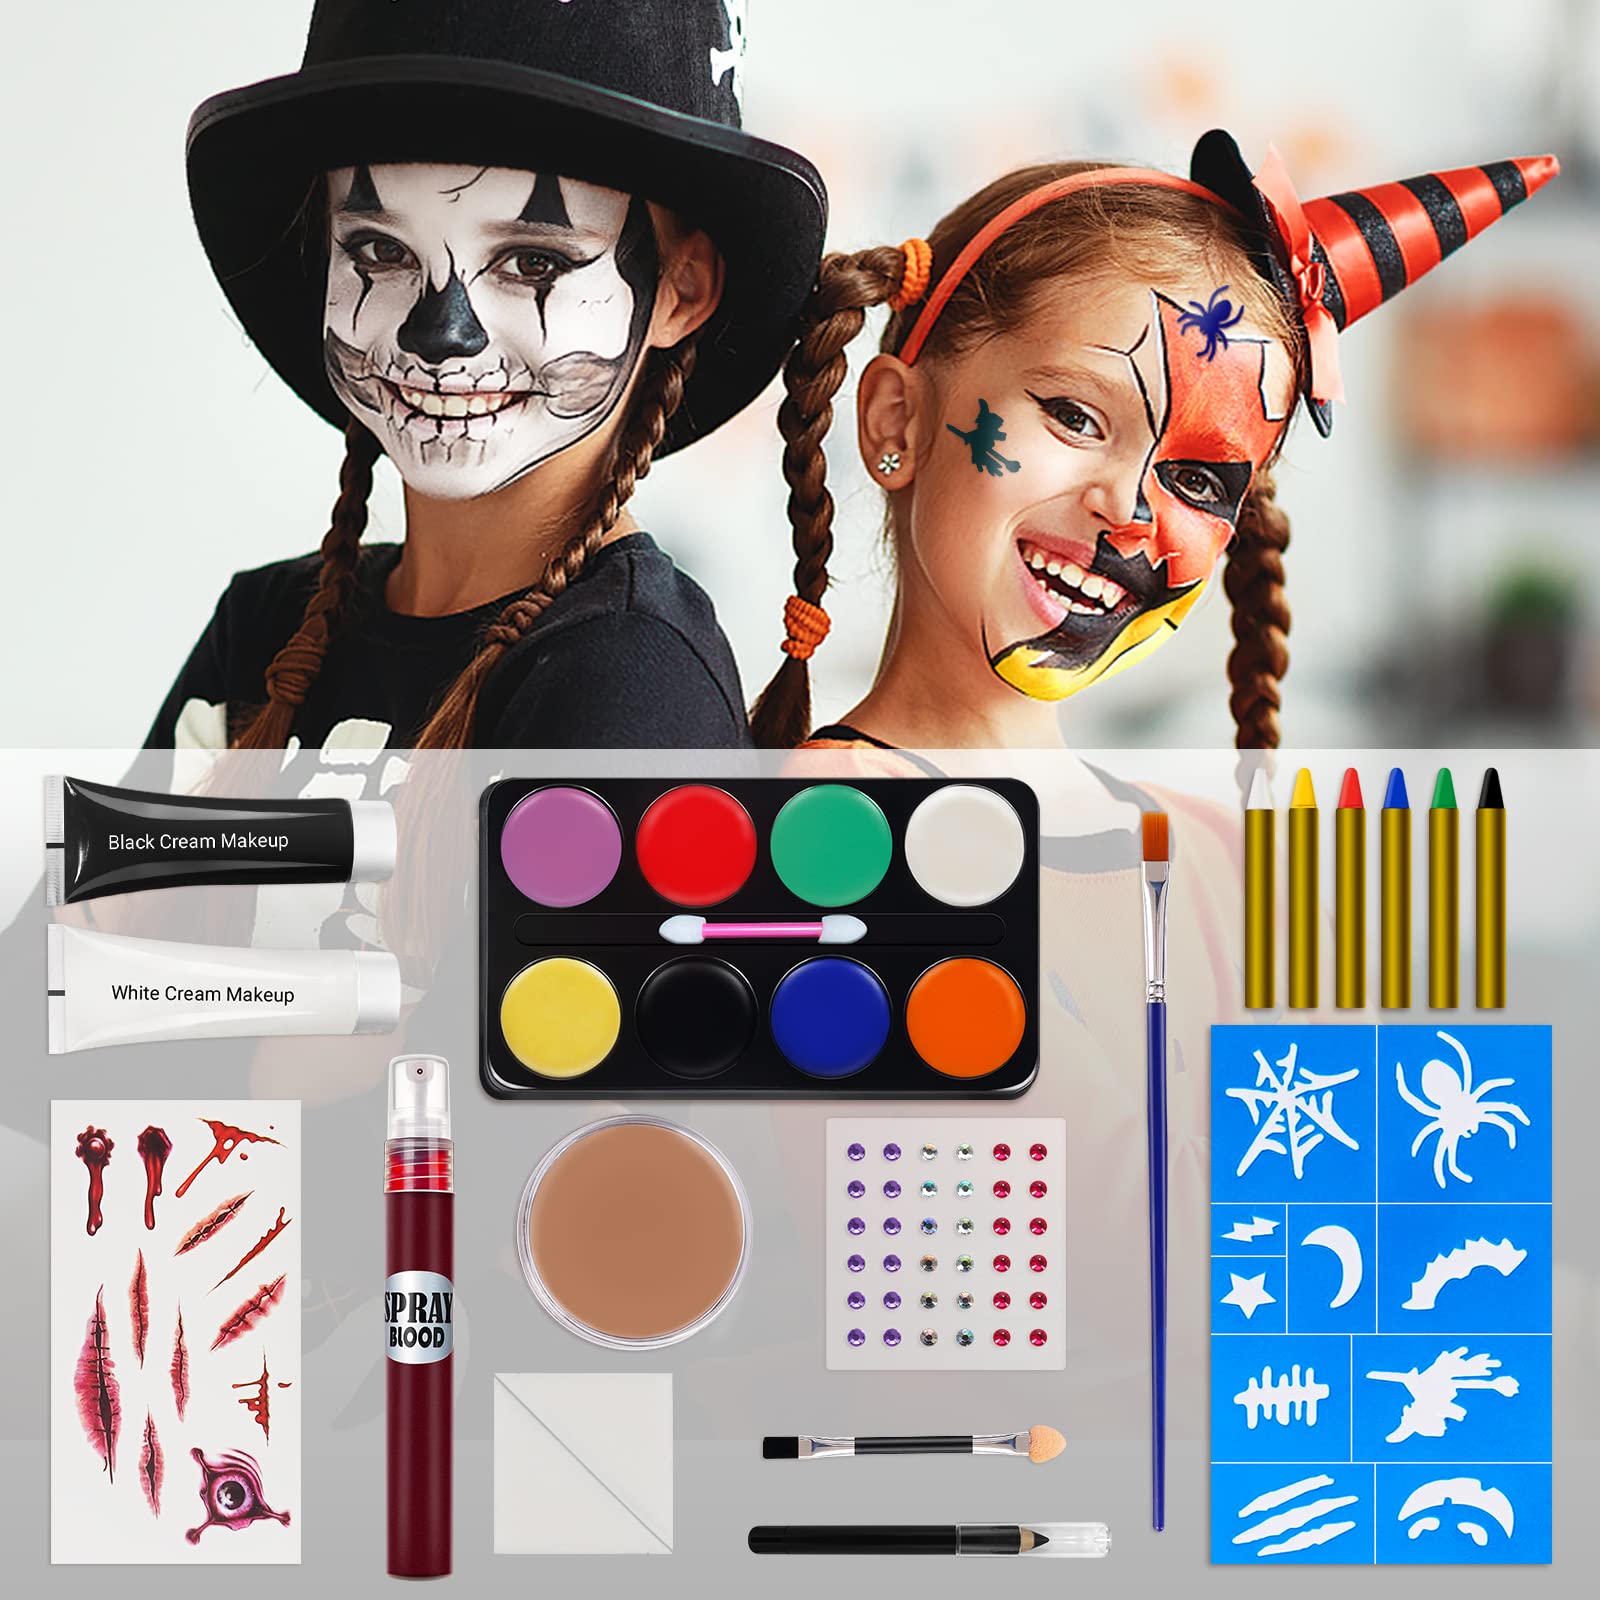 2022 Upgraded Halloween Makeup Kit, White Black Skeleton Face Paint, Clown Witch Makeup Palette, Vampire Zombie Makeup Kids Adult Special Effects: Fake Blood Scar Wax Tattoos Stencils Crayons Set